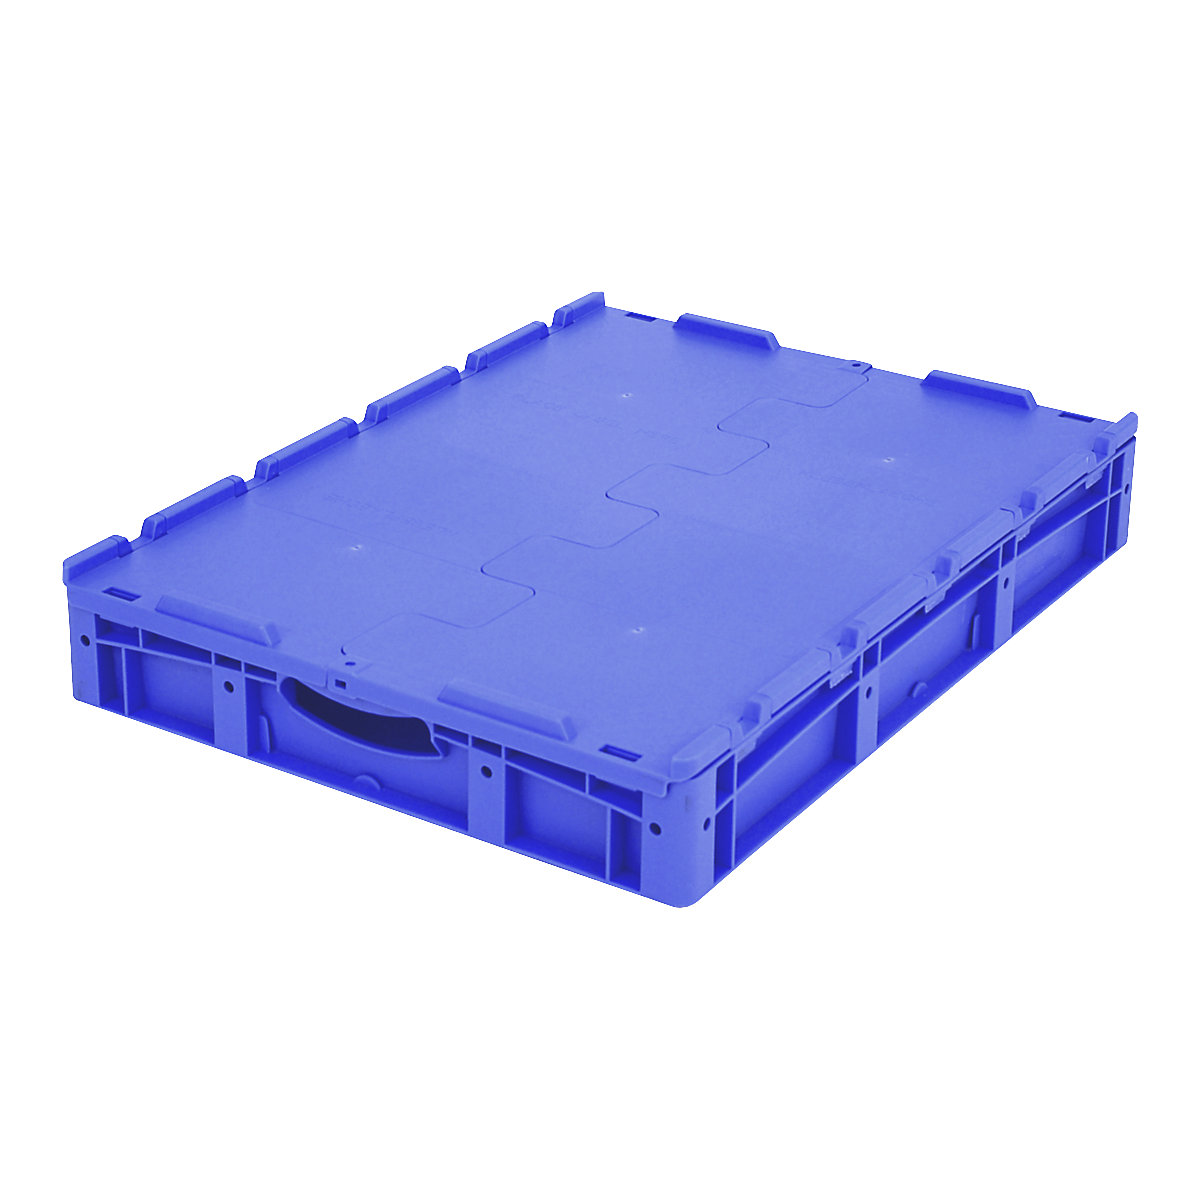 XL Euro stacking container – BITO, with 2-section hinged lid, LxWxH 800 x 600 x 138 mm-2